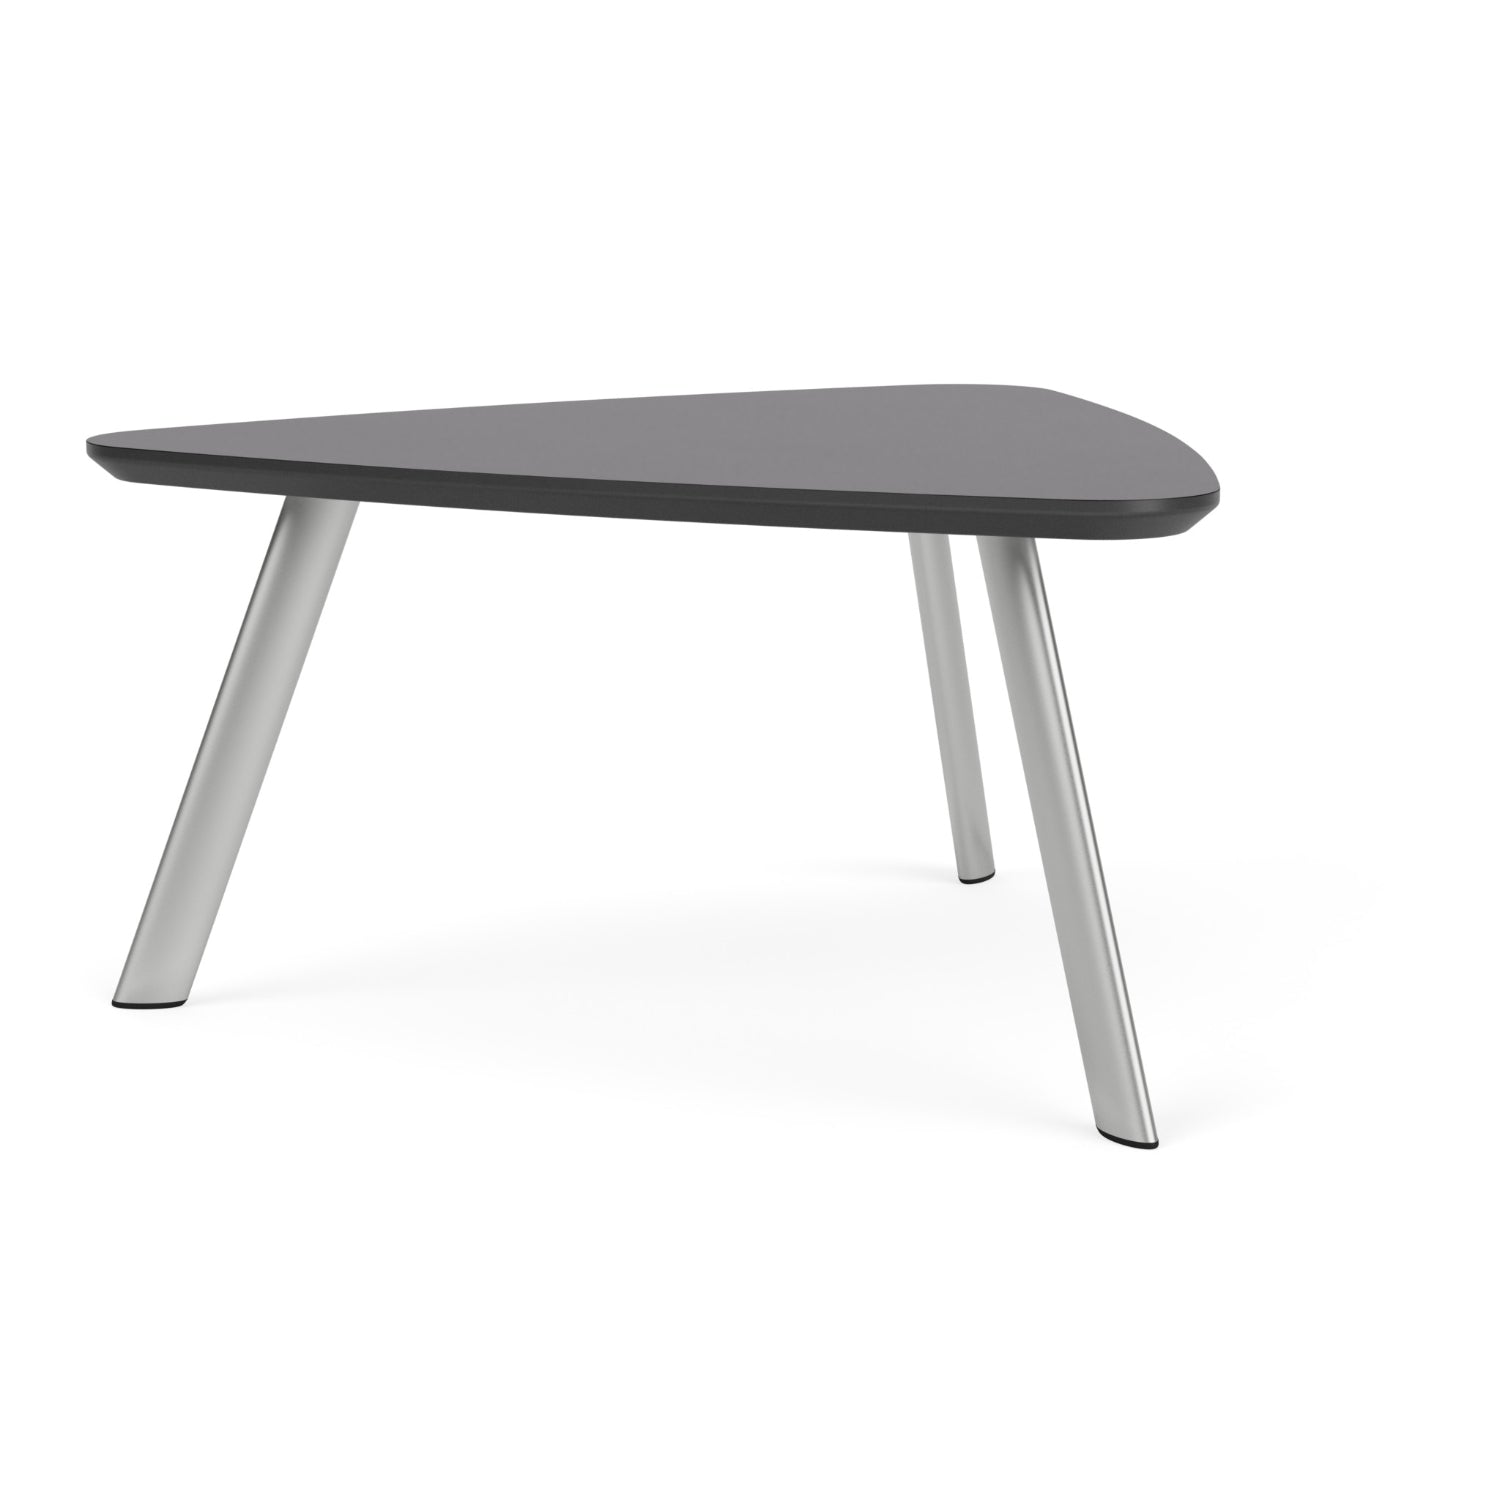 Willow Collection Conversational Table with Laminate Tabletop, FREE SHIPPING